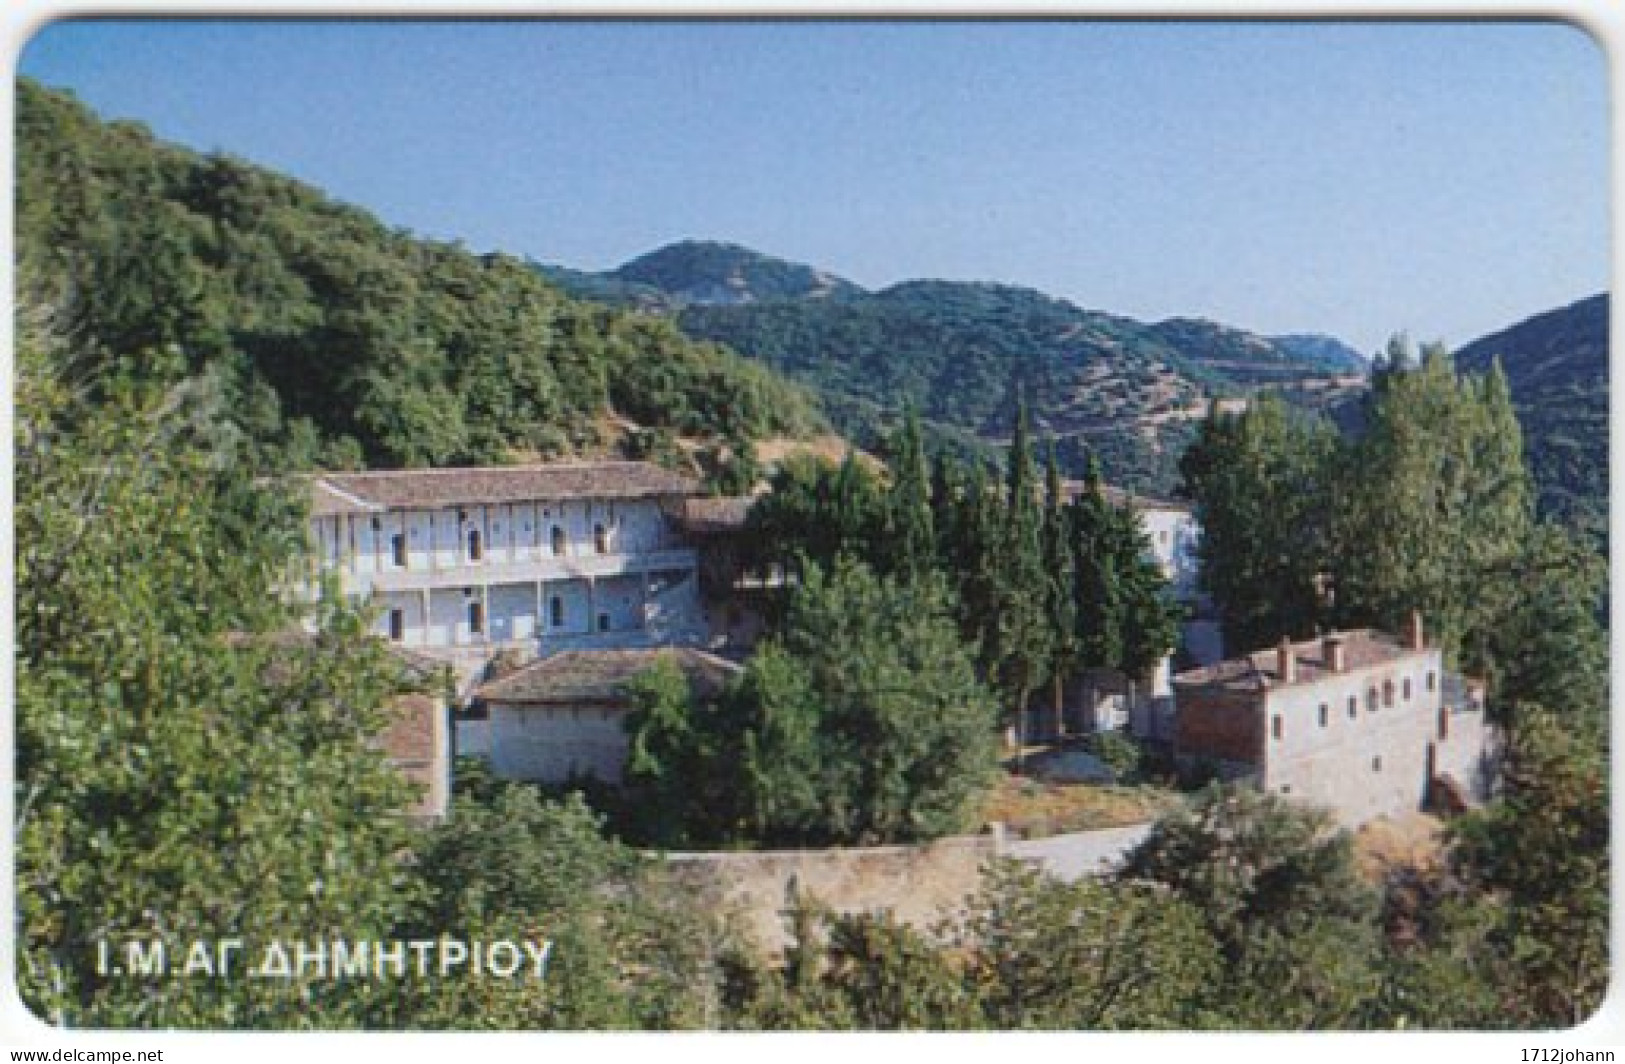 GREECE D-016 Chip OTE - View, Village - Used - Griechenland